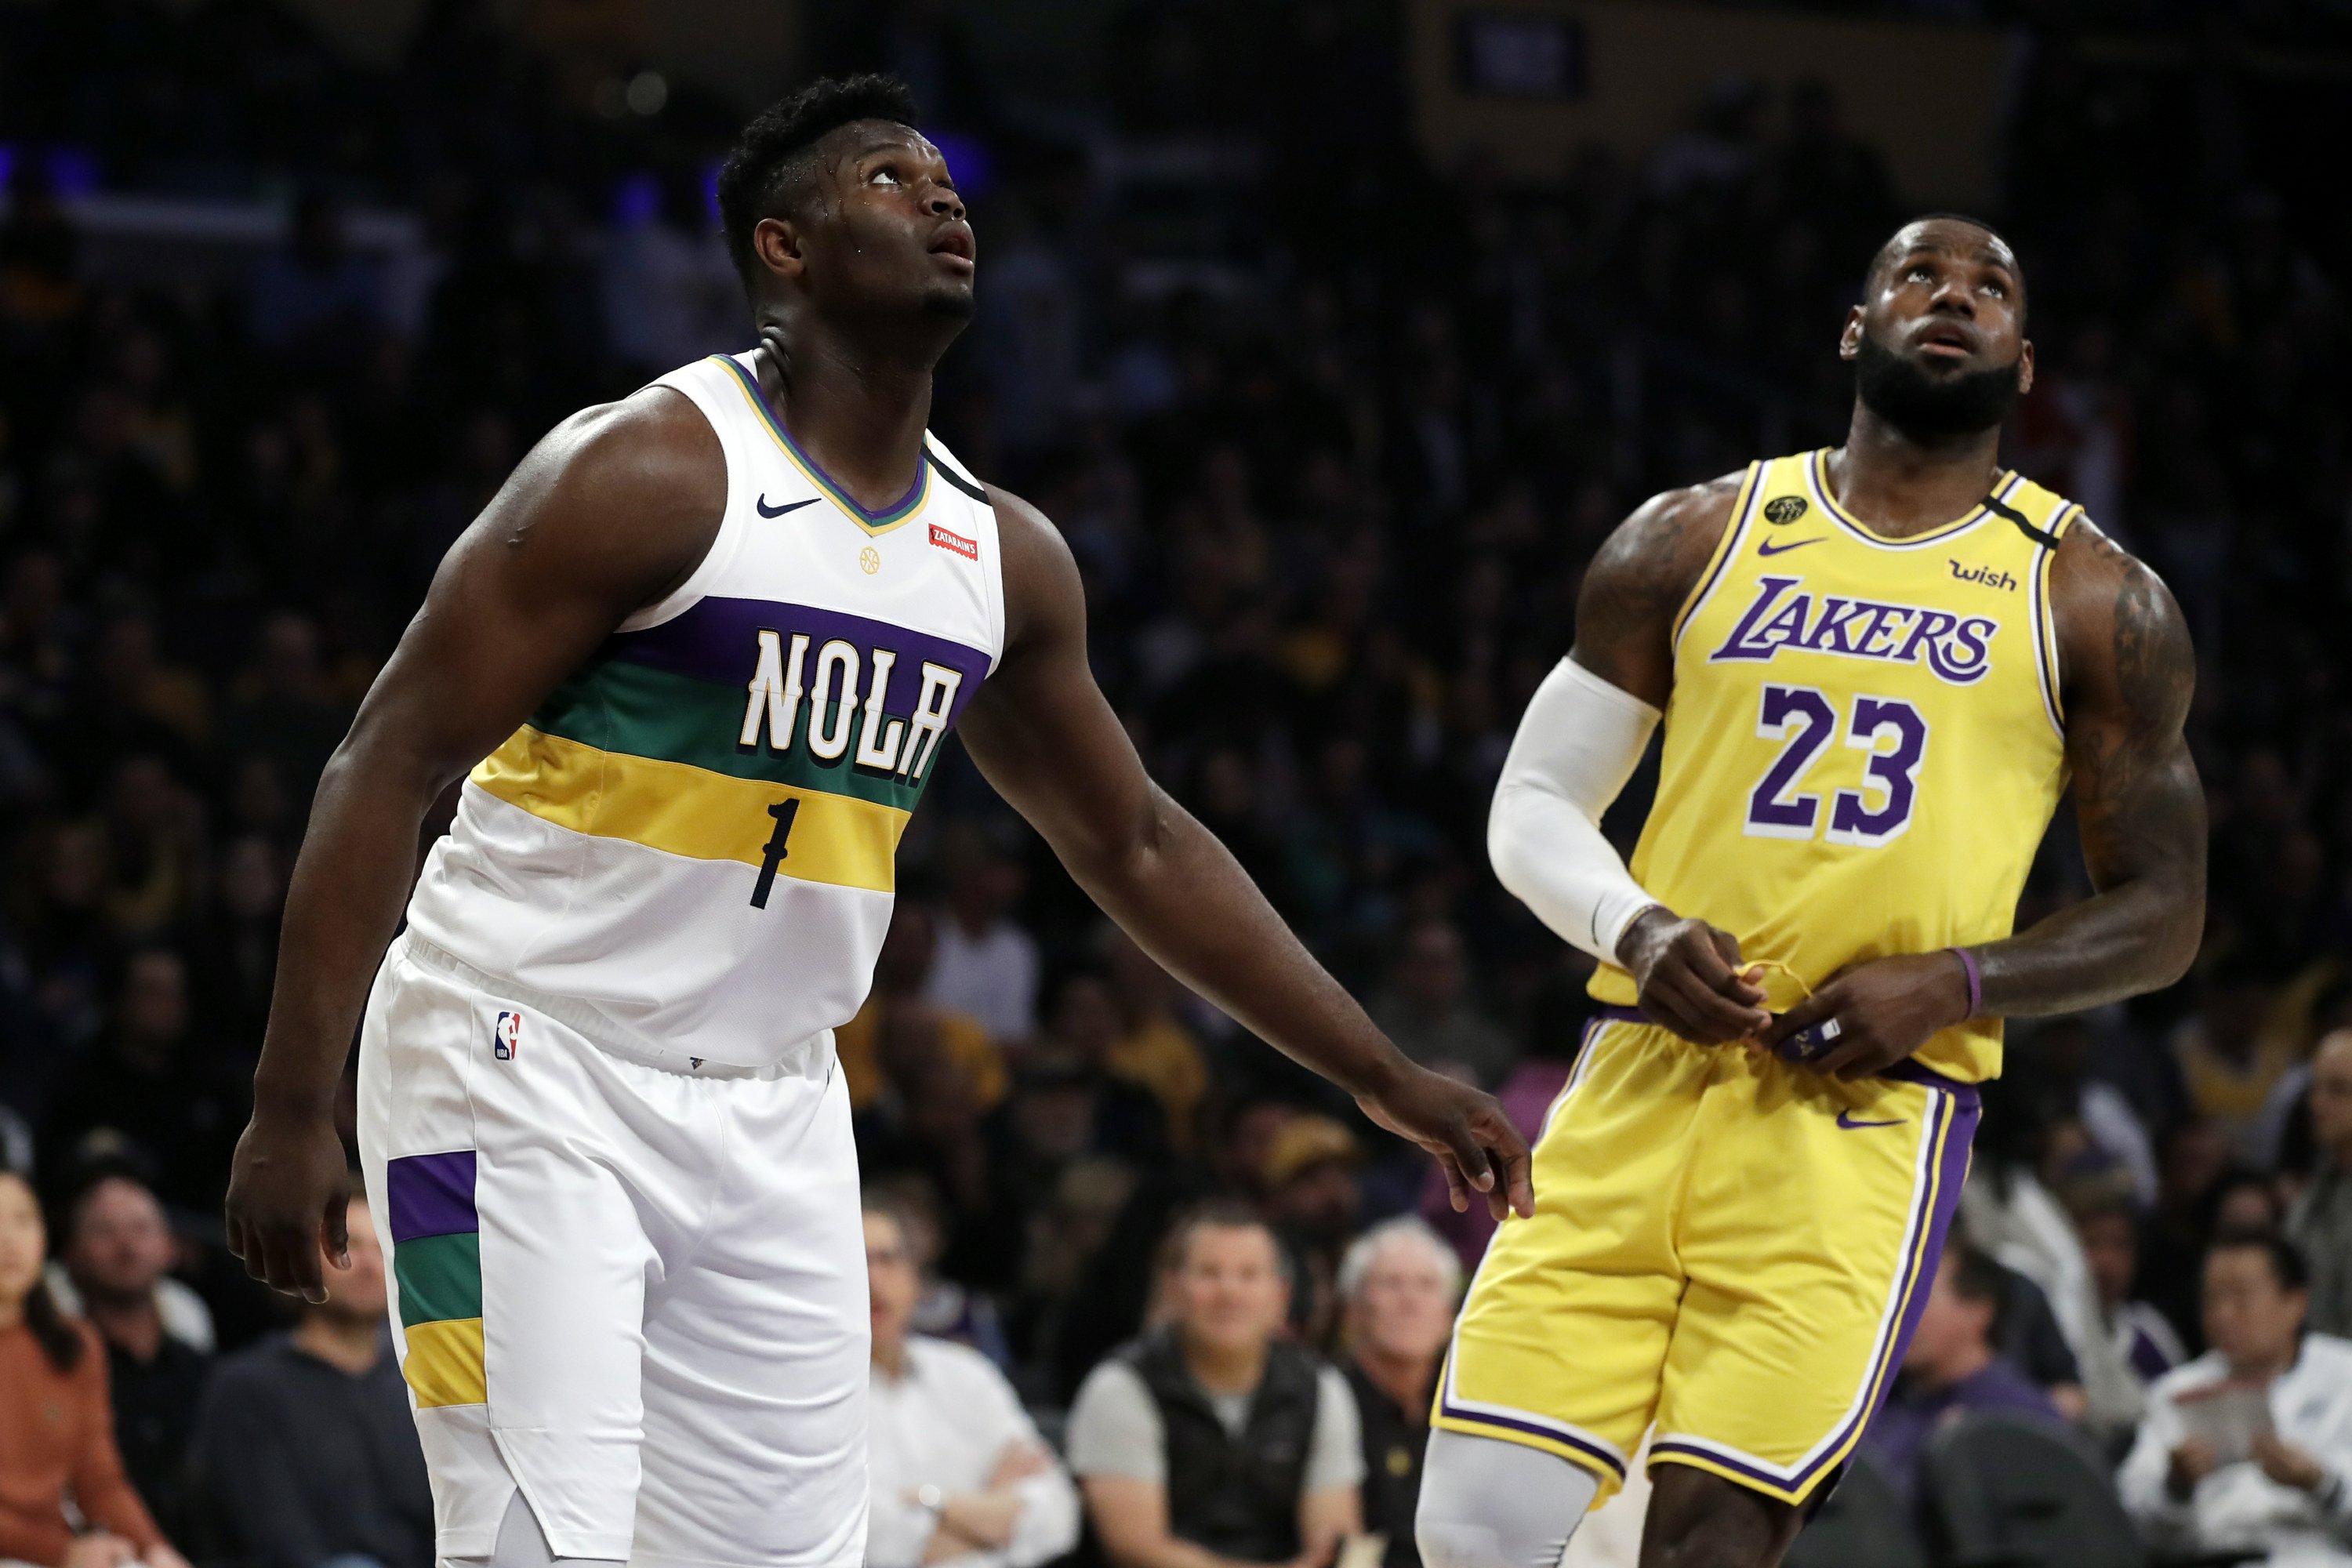 LeBron's 40 bests Zion, sends Lakers 